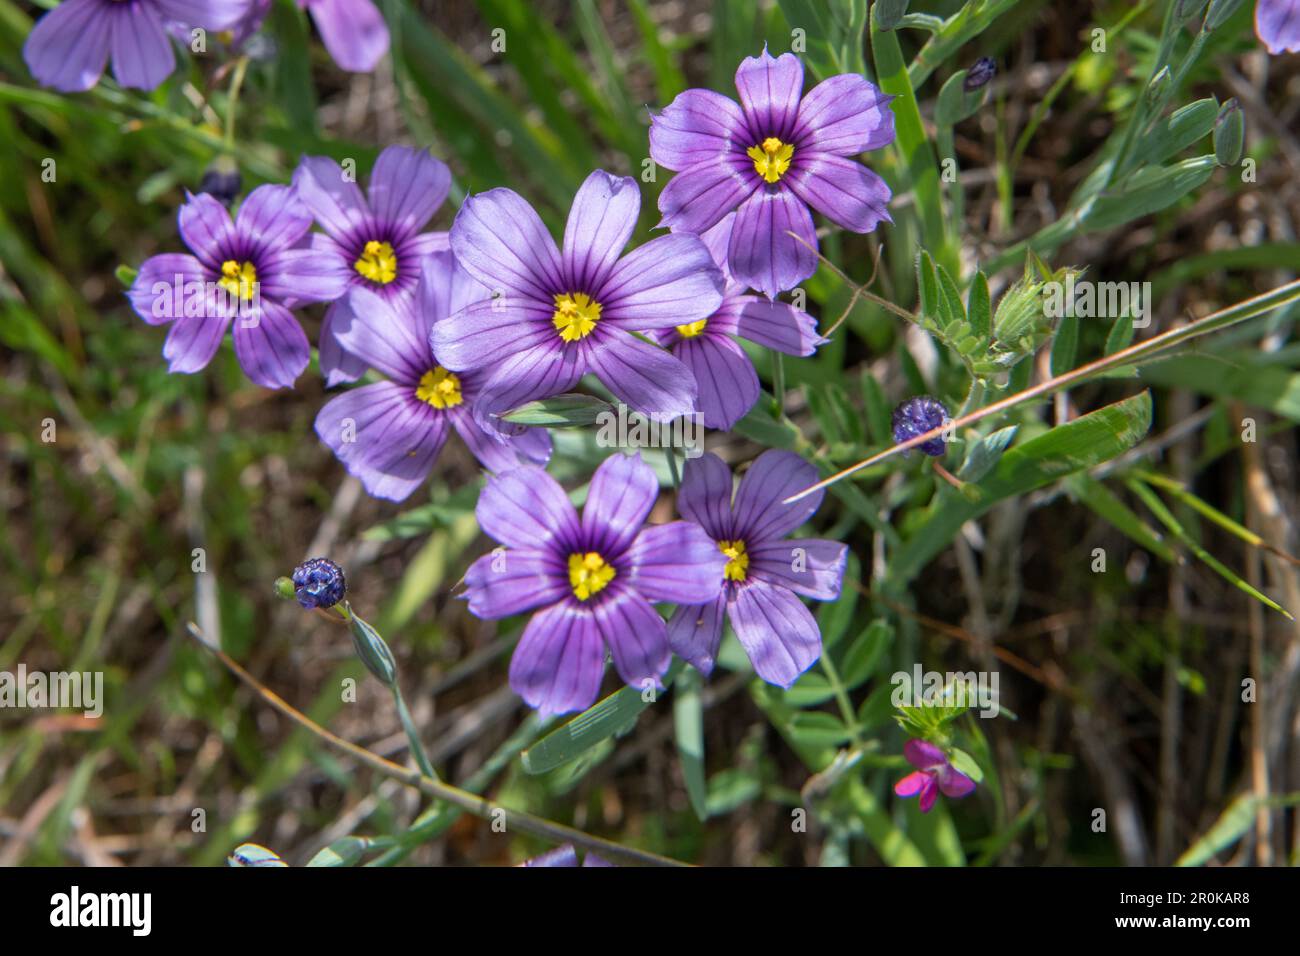 Western Blue-eyed Grass, Sisyrinchium bellum, a flowering plant blooming in Marin county in California. Stock Photo